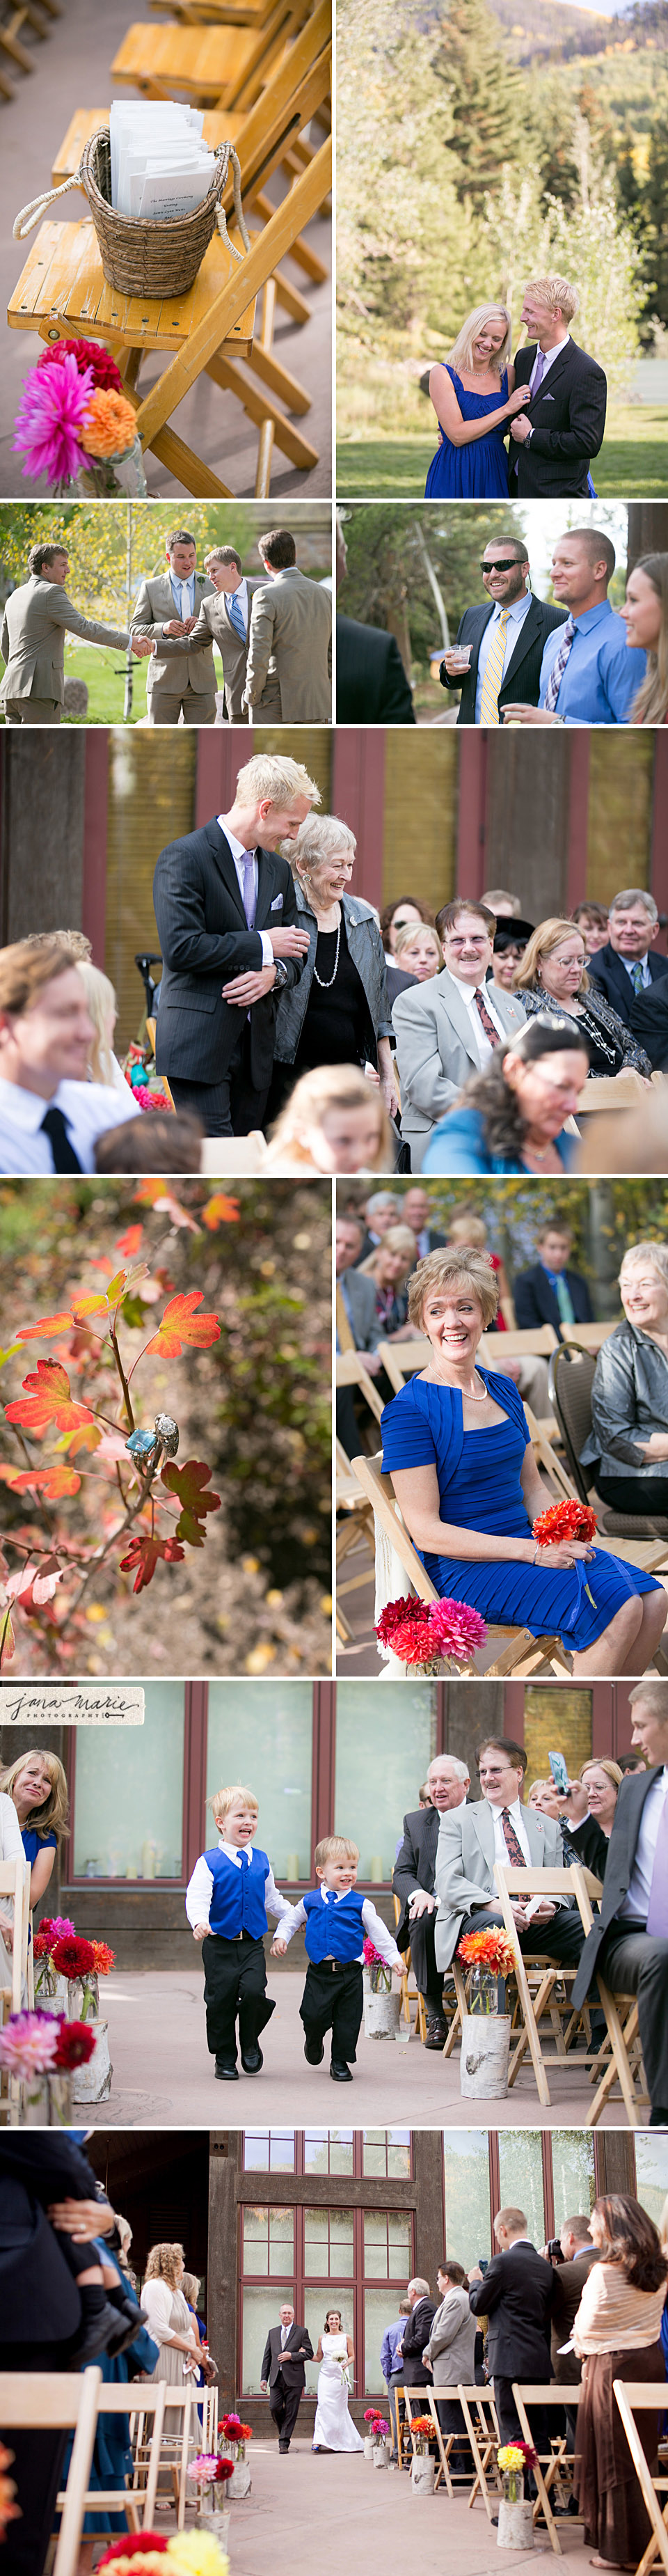 Fall leaves, ring shots, details, mother of bride, wedding ceremony, JoAnn Moore, Blue grass band, Cocktail hour